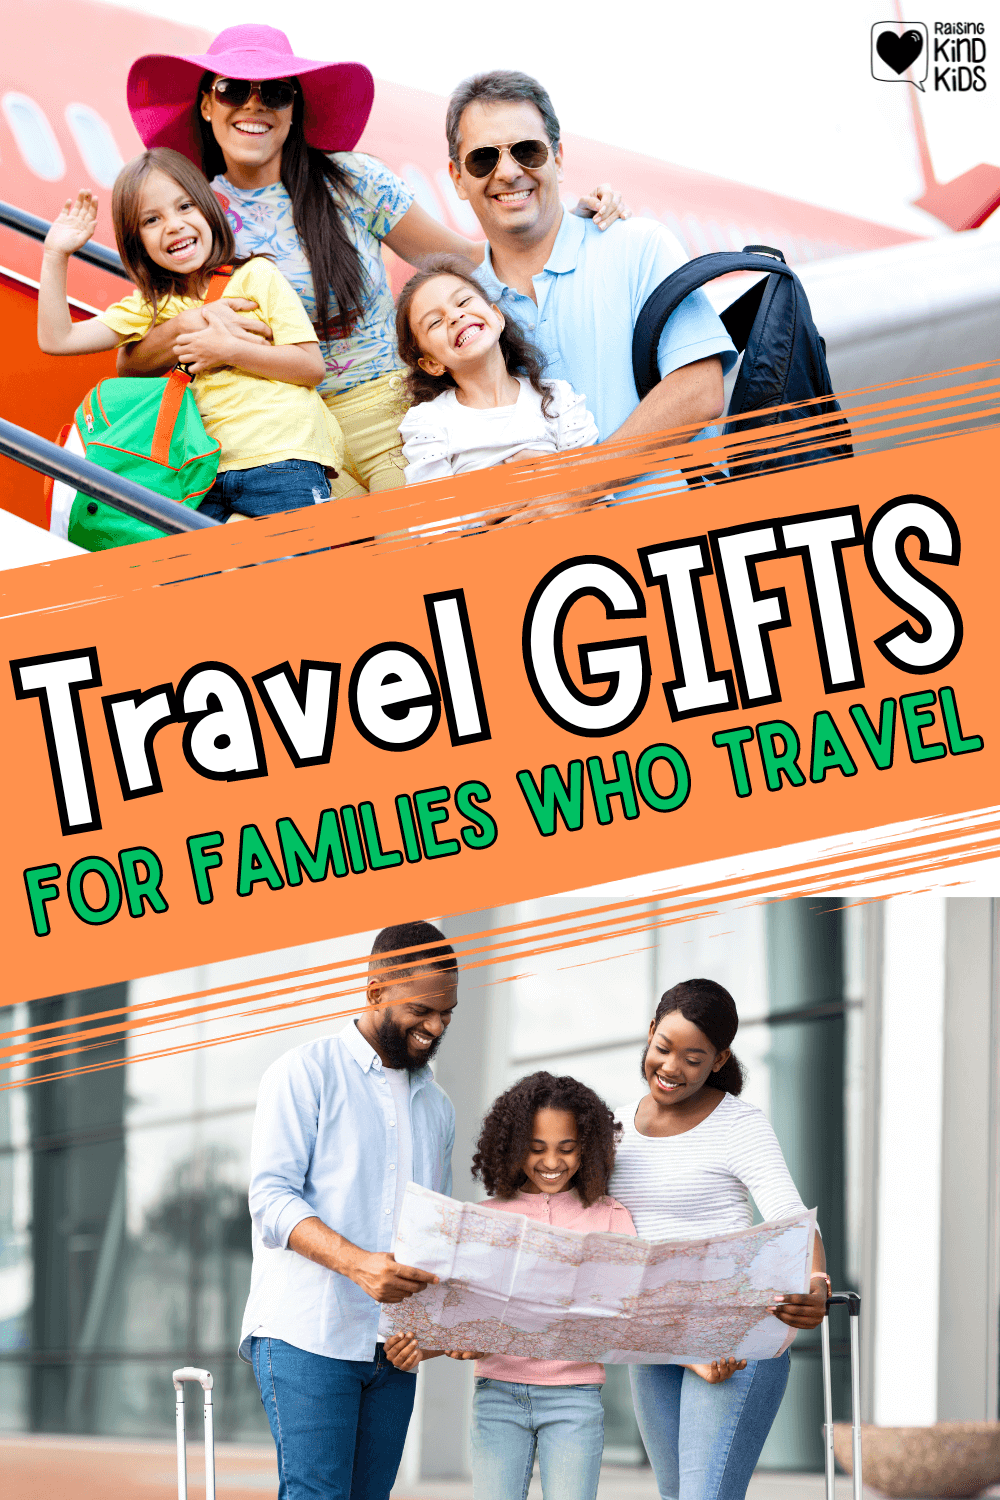 Use these travel gift ideas for family adventures and family travels as the perfect gift for families who love to explore the world.